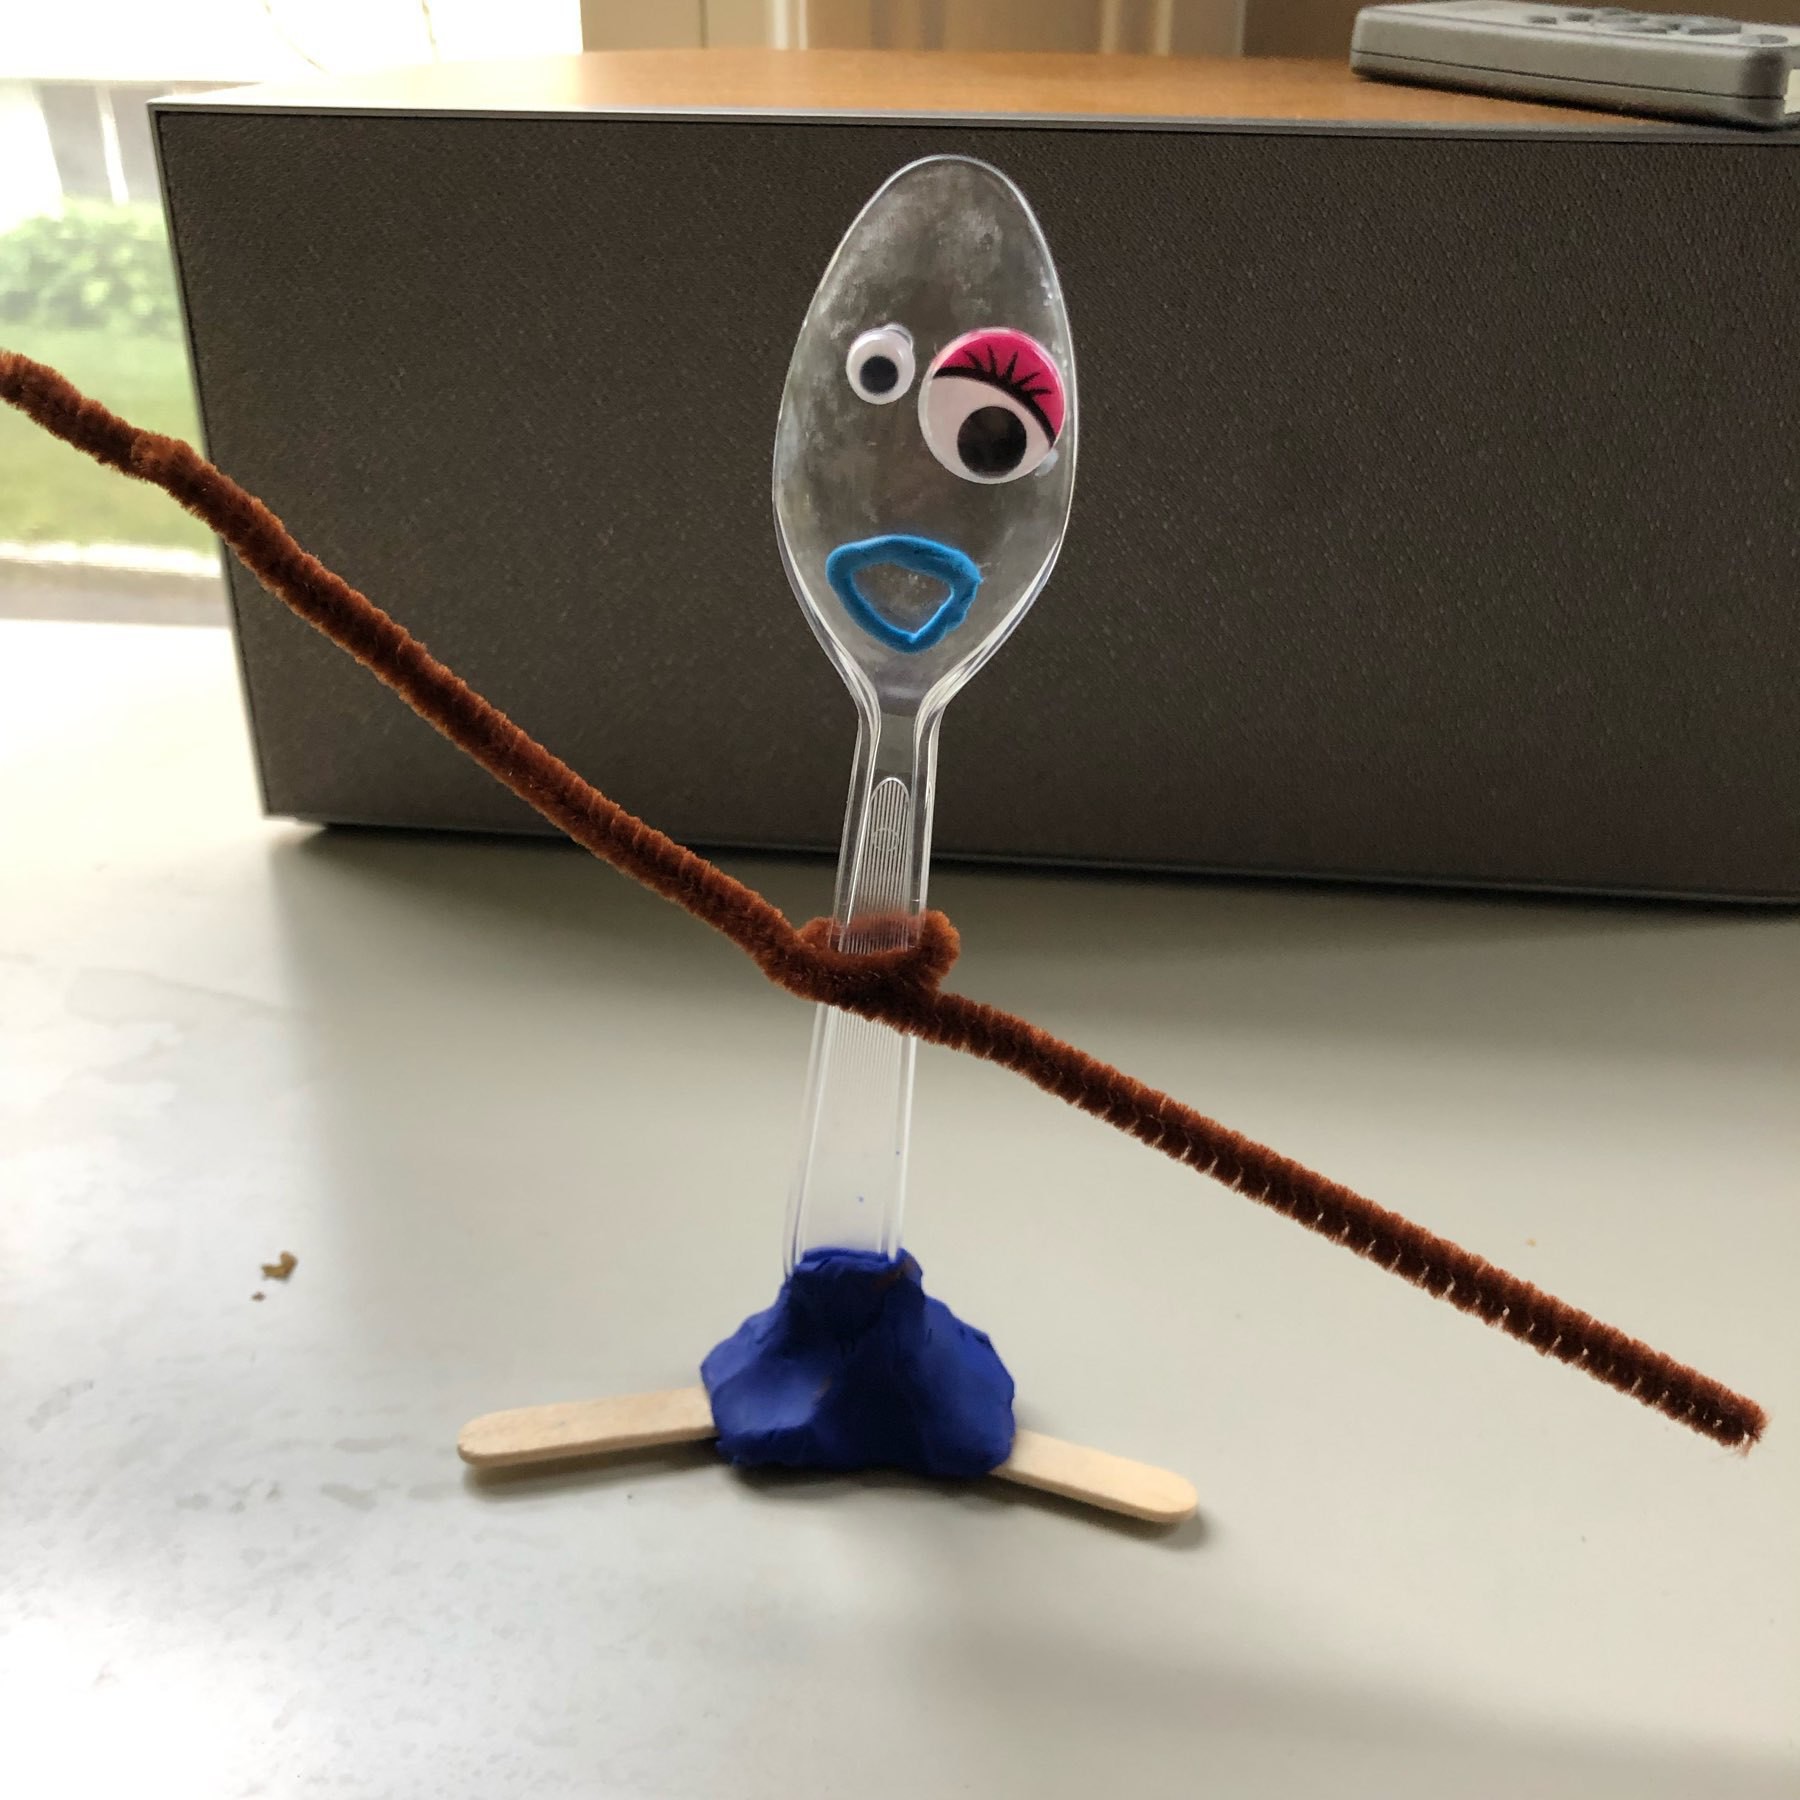 Makeshift toy made from a plastic spoon, pipe cleaner, clay, and popsicle stick. Inspired by Toy Story 4.